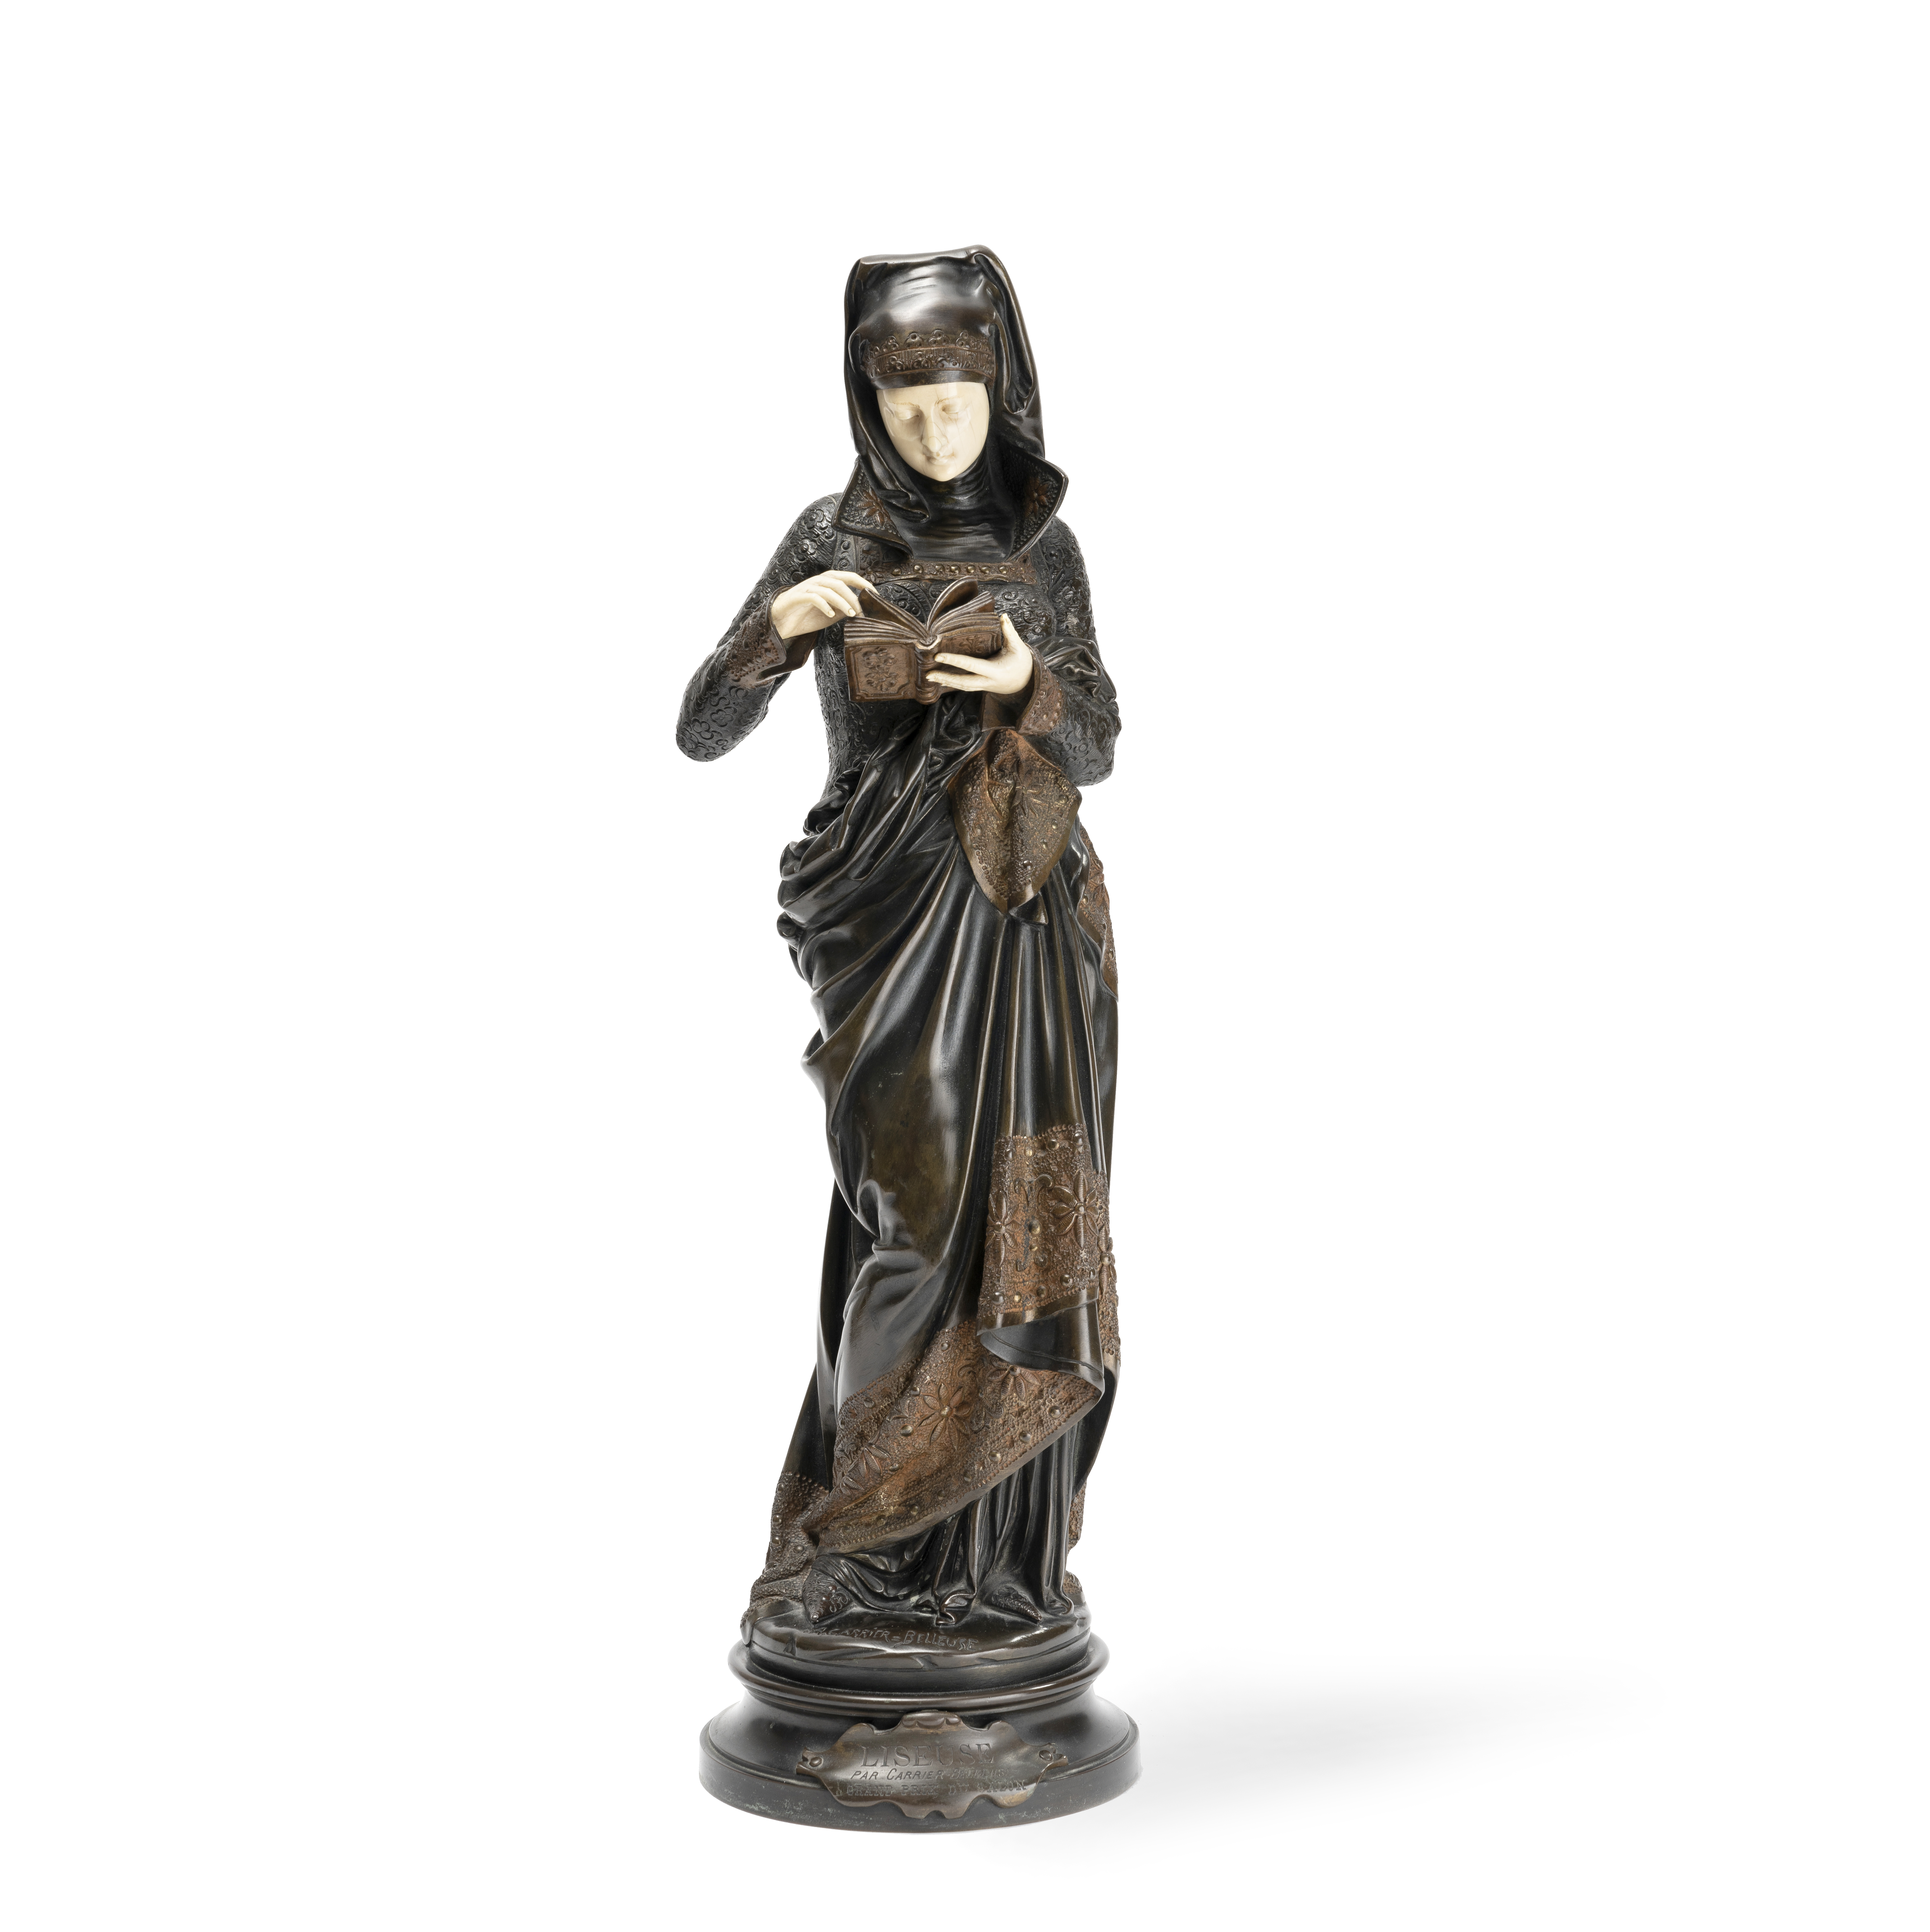 After Albert Carrier Belleuse (French, 1824-1887): A bronze and ivory model of 'La Liseuse'